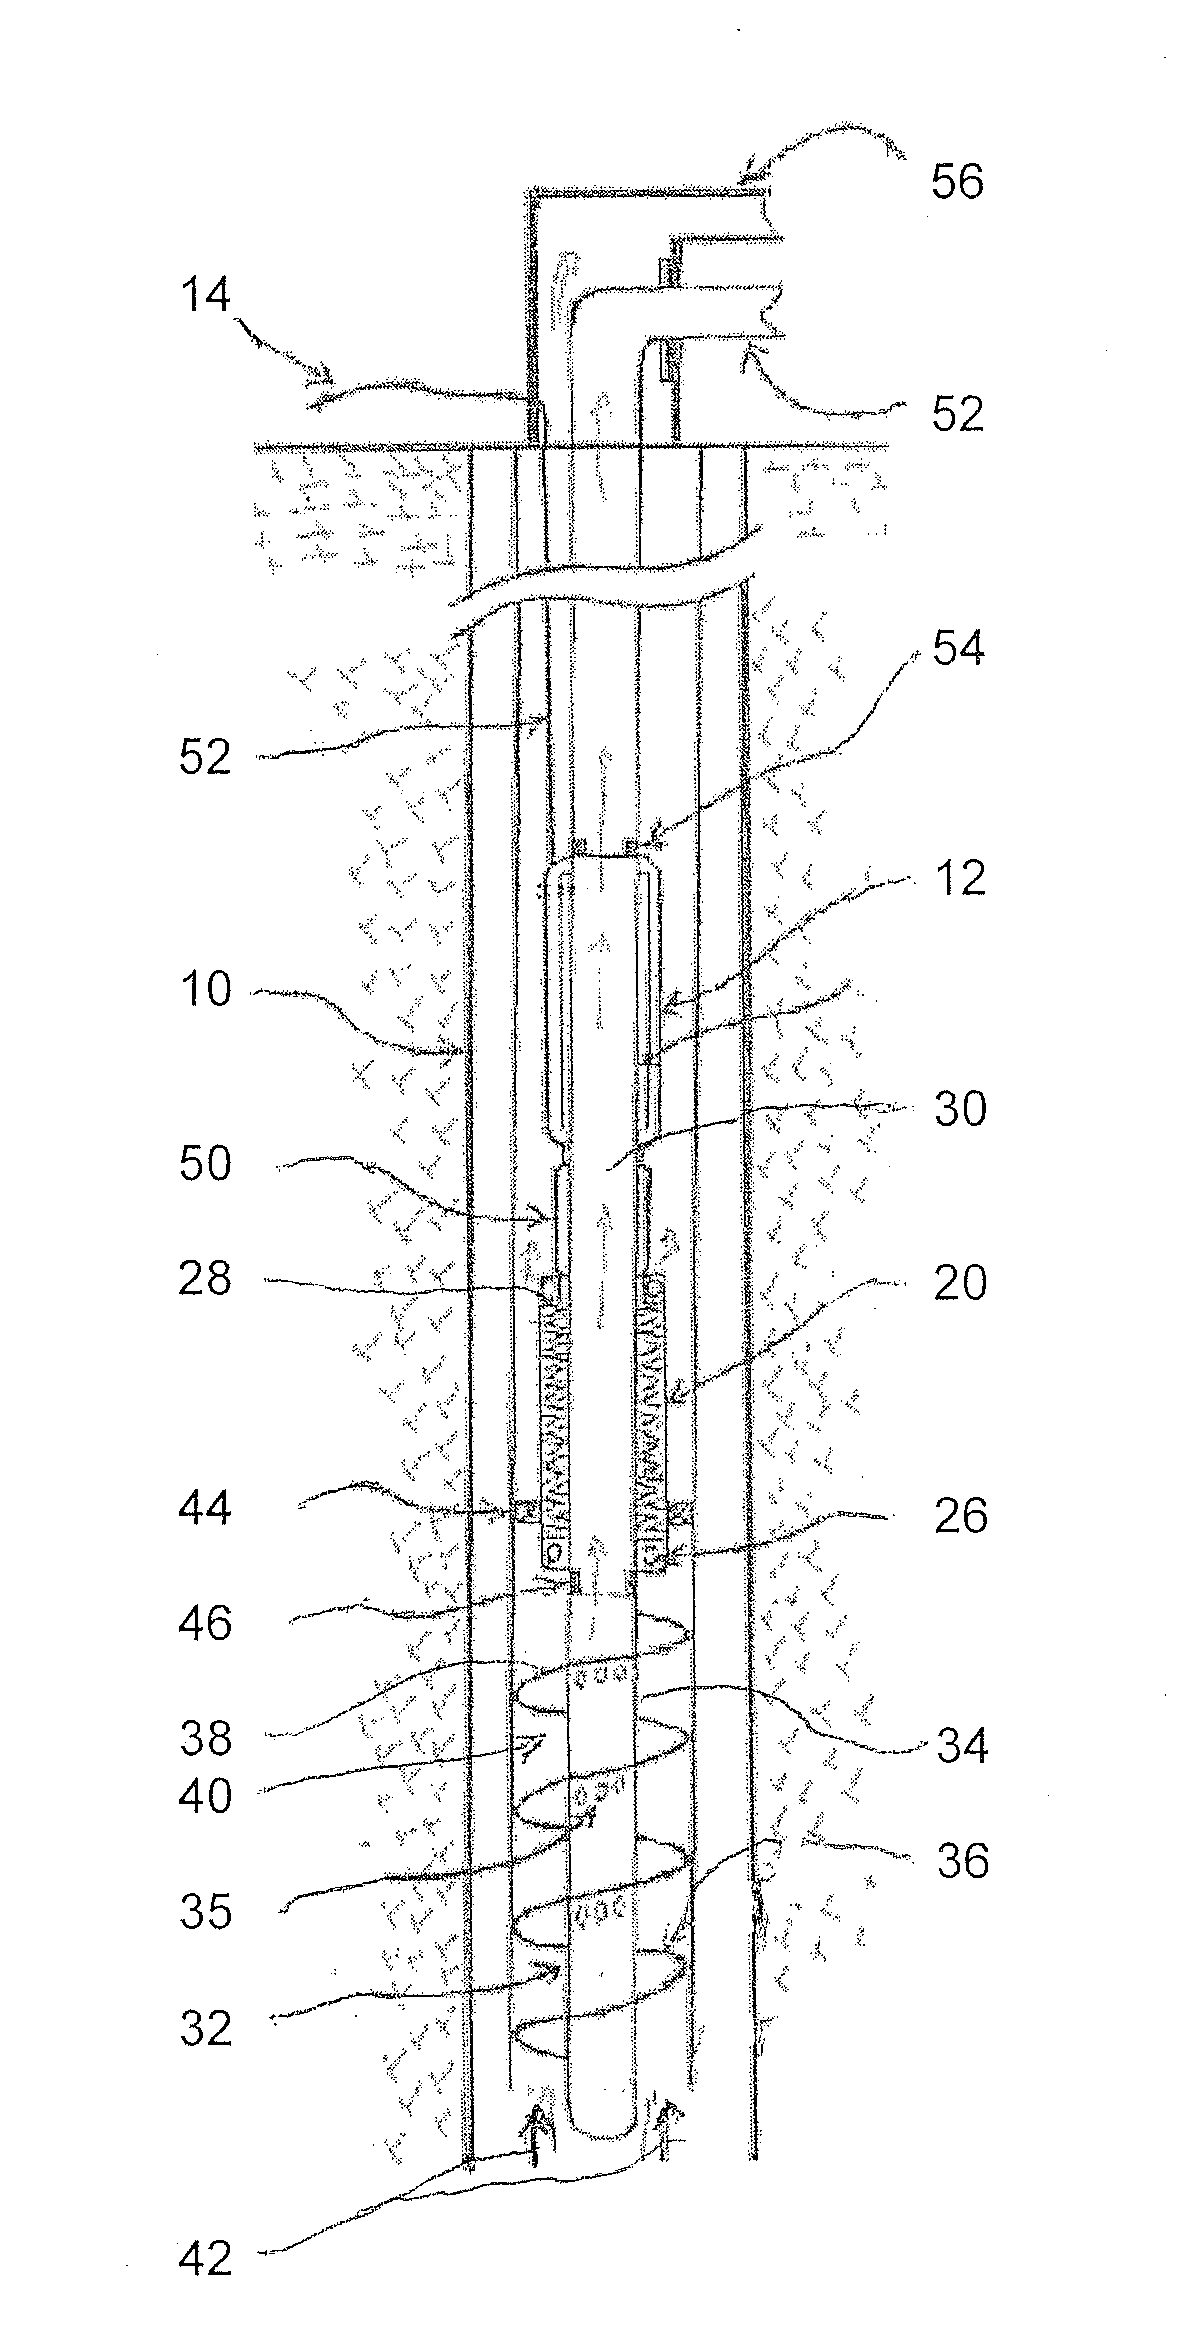 Electrical submersible pump assembly for separating gas and oil